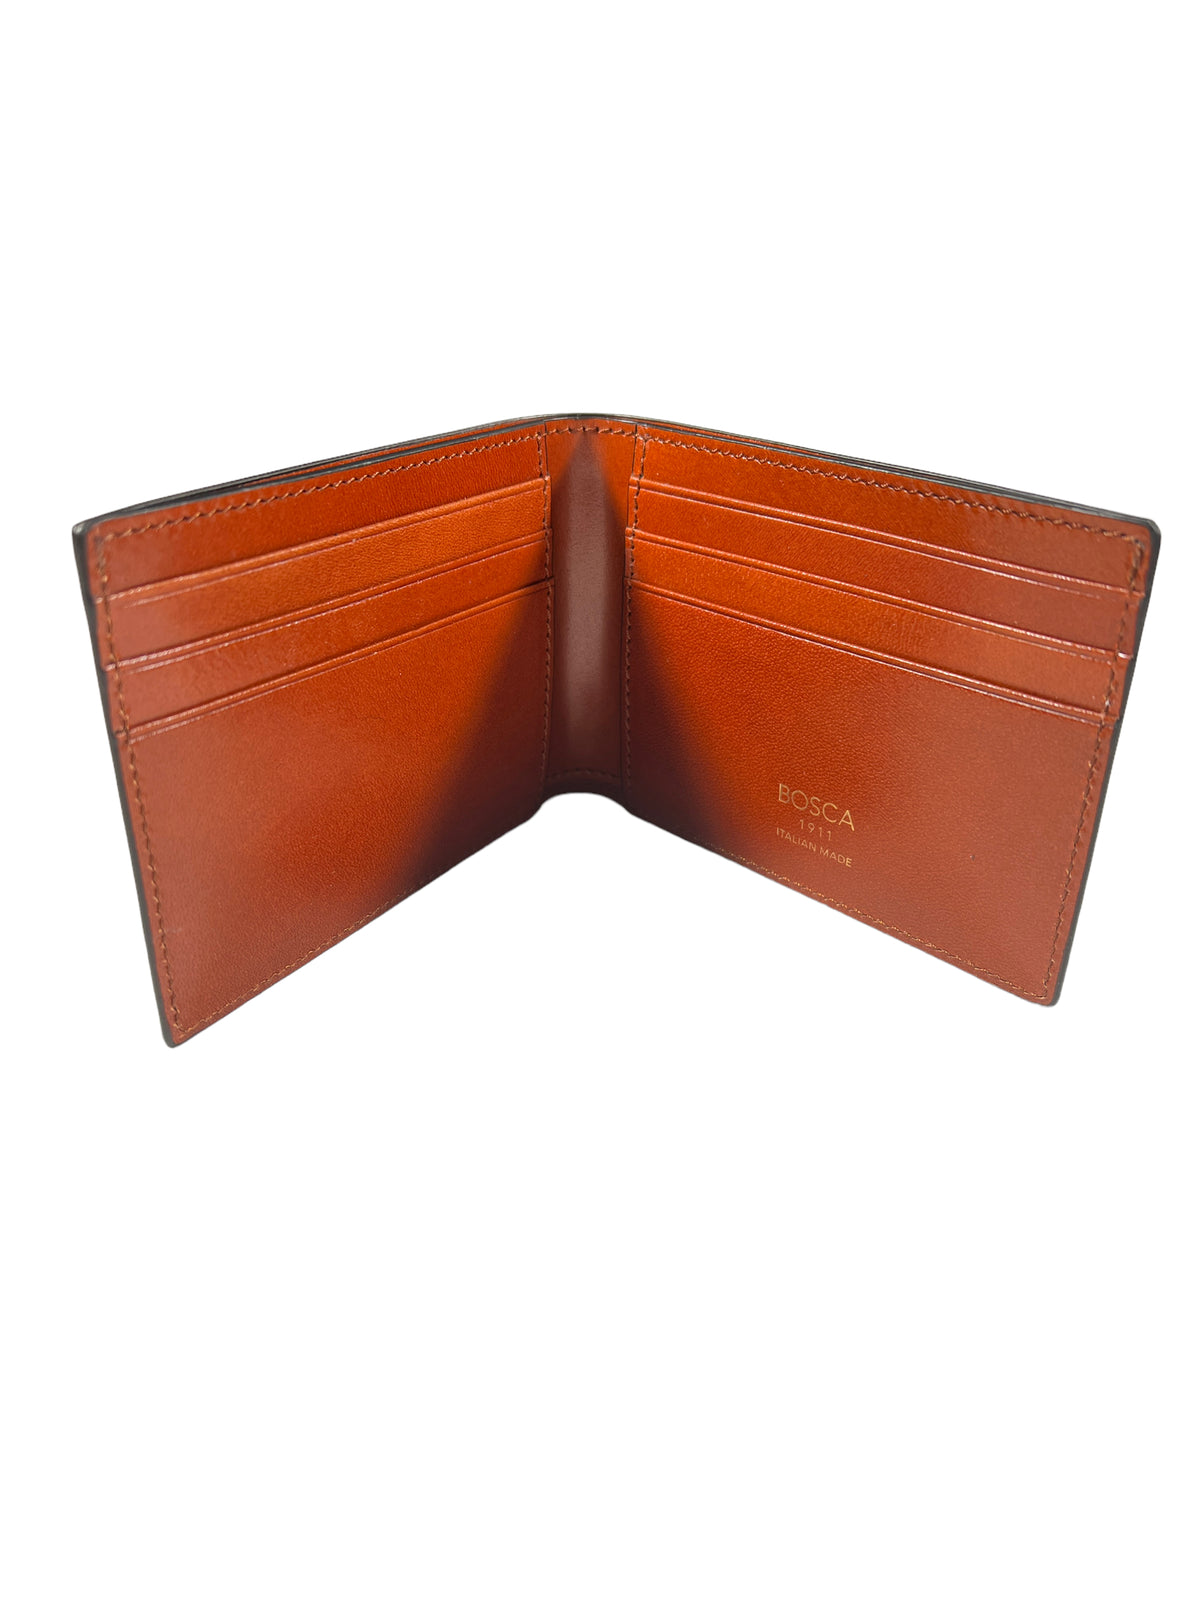 BOSCA 1911 SMALL BIFOLD WALLET - OLD LEATHER SMOKED